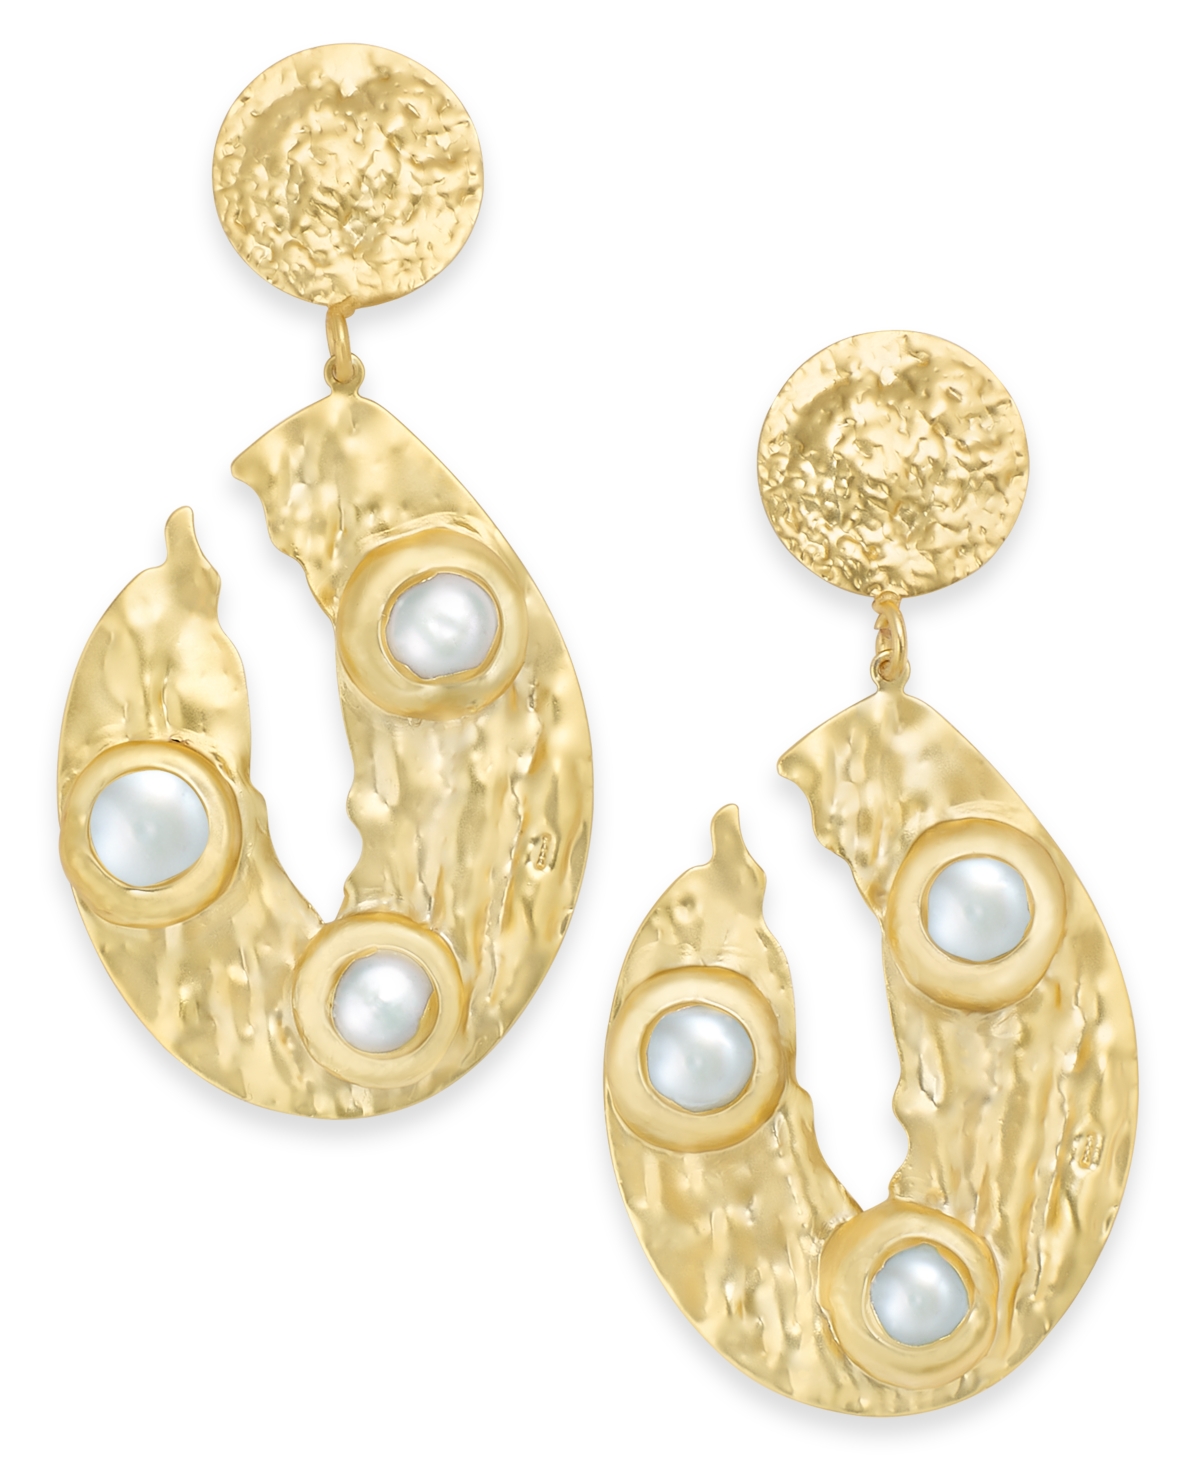 18k Gold-Plated Sterling Silver Hammered Imitation Pearl Drop Earrings - Gold